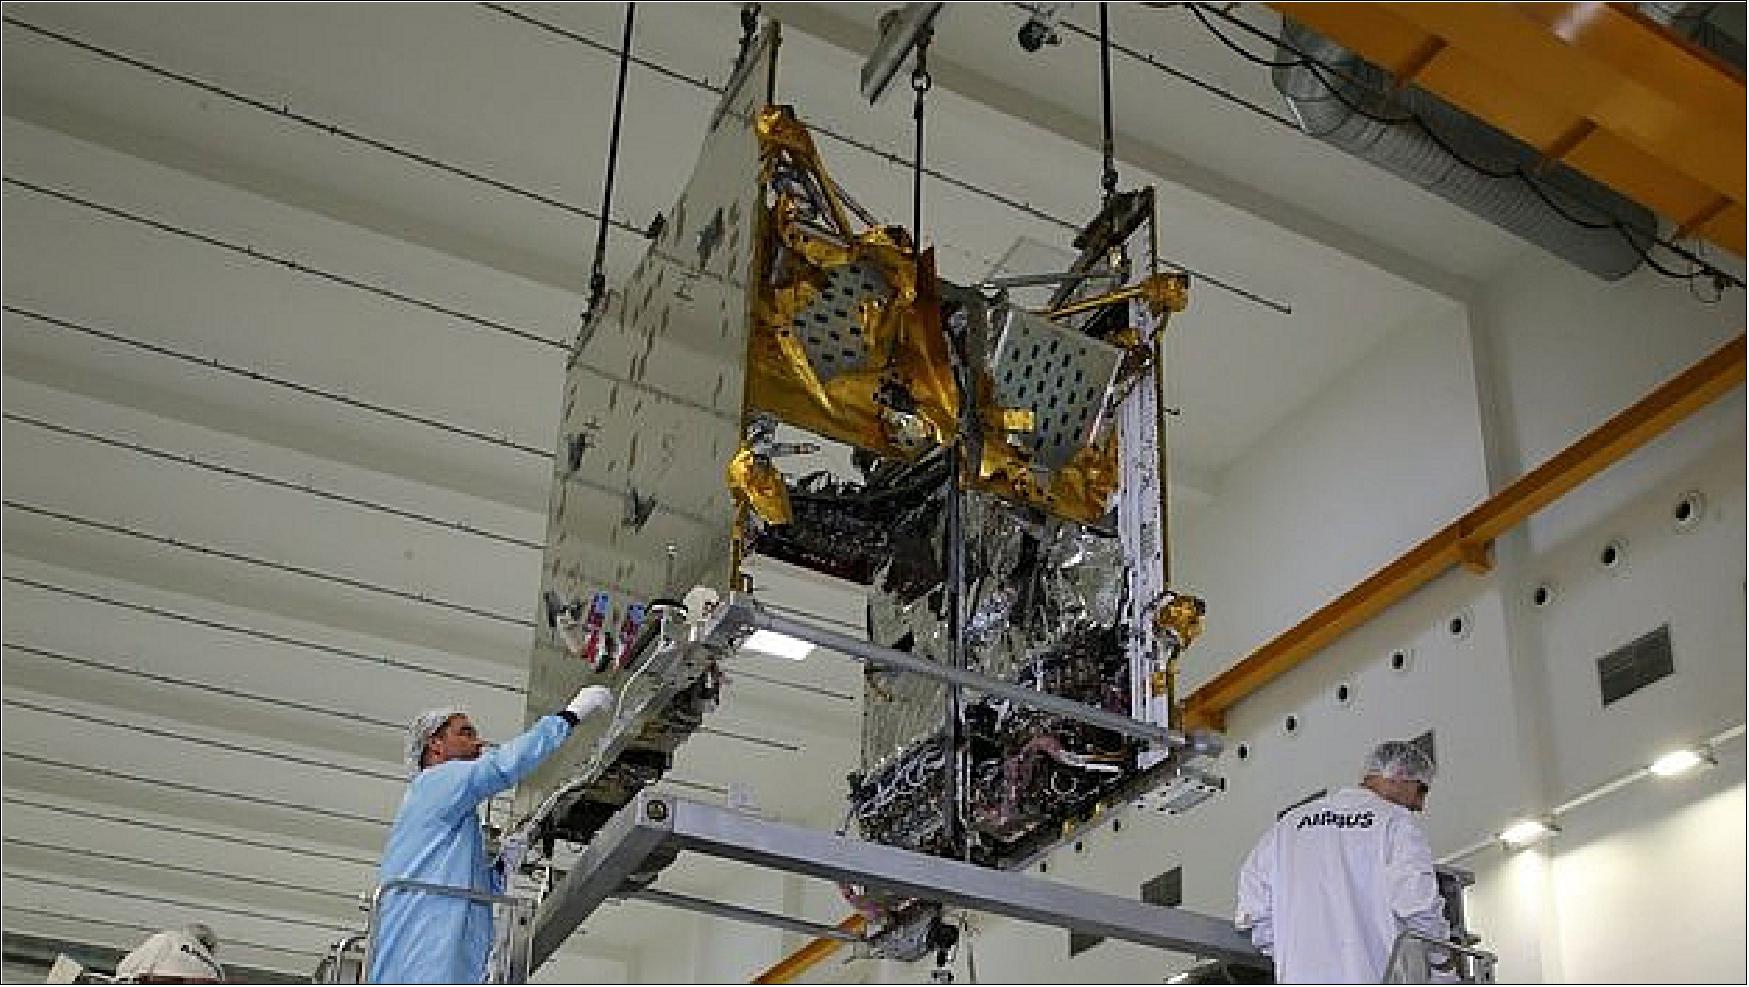 Figure 11: The communications module of Quantum is slowly lowered onto the service module (image credit: ESA, Airbus)